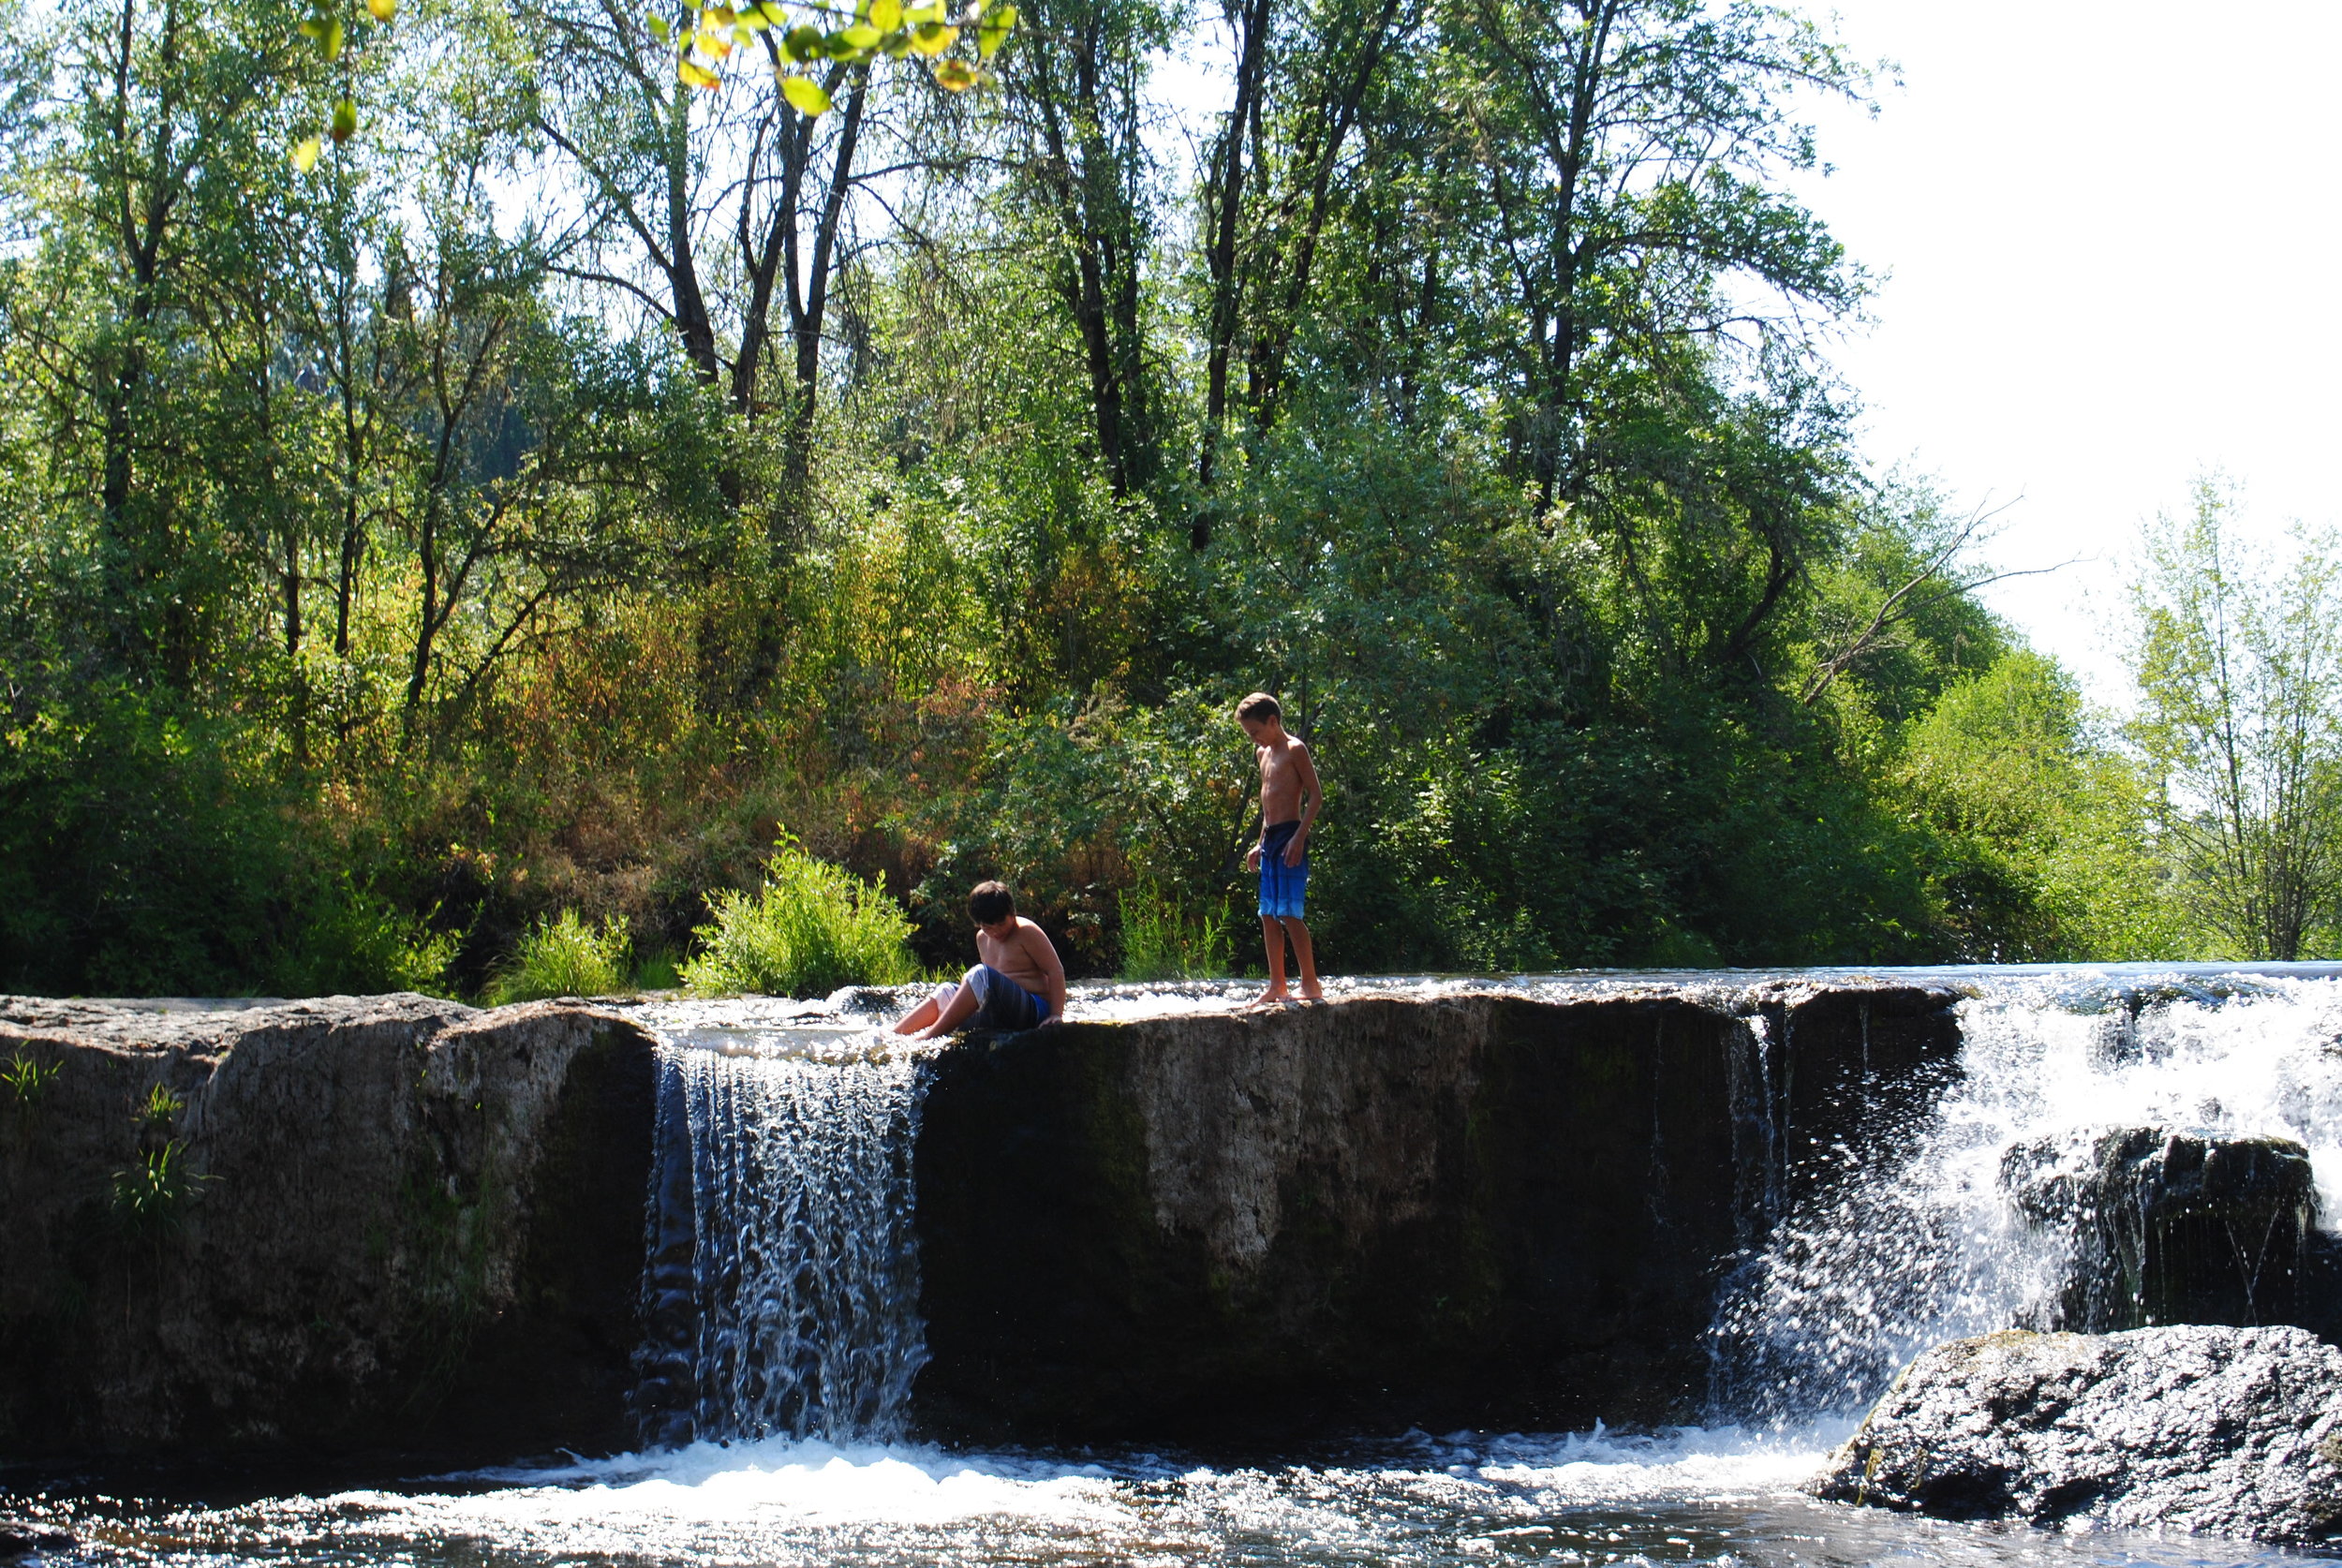 CROWFOOT FALLS - What to do in Southern Oregon - Swiming Hole - Trail, Oregon - Kids